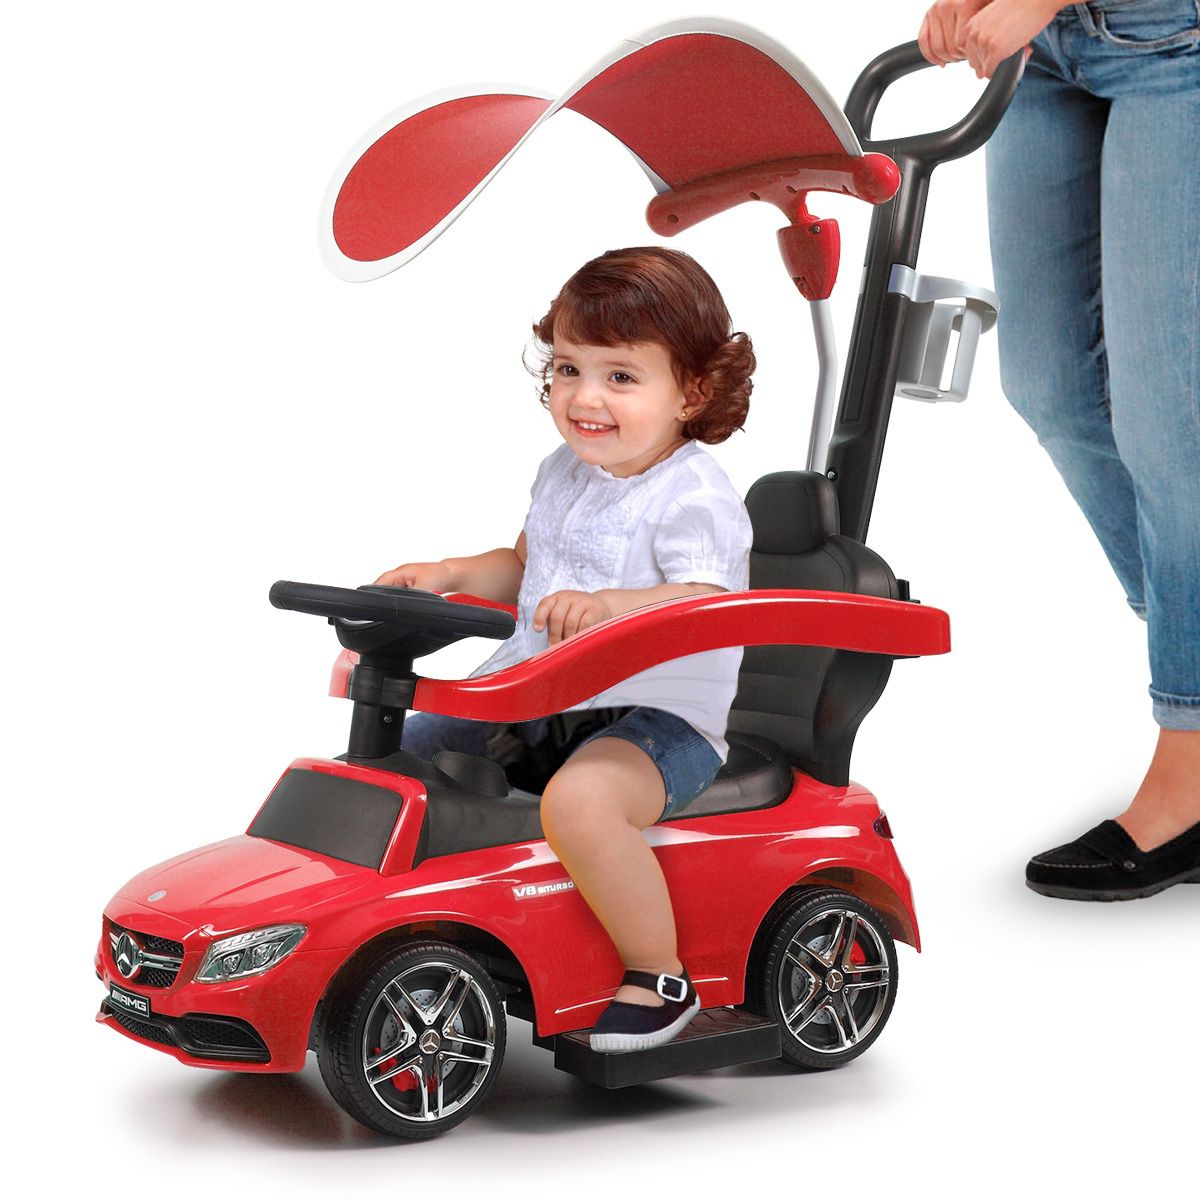 Red Mercedes Benz Kids Ride On Push Car Portable Riding Toy Gift w/ canopy and push rod